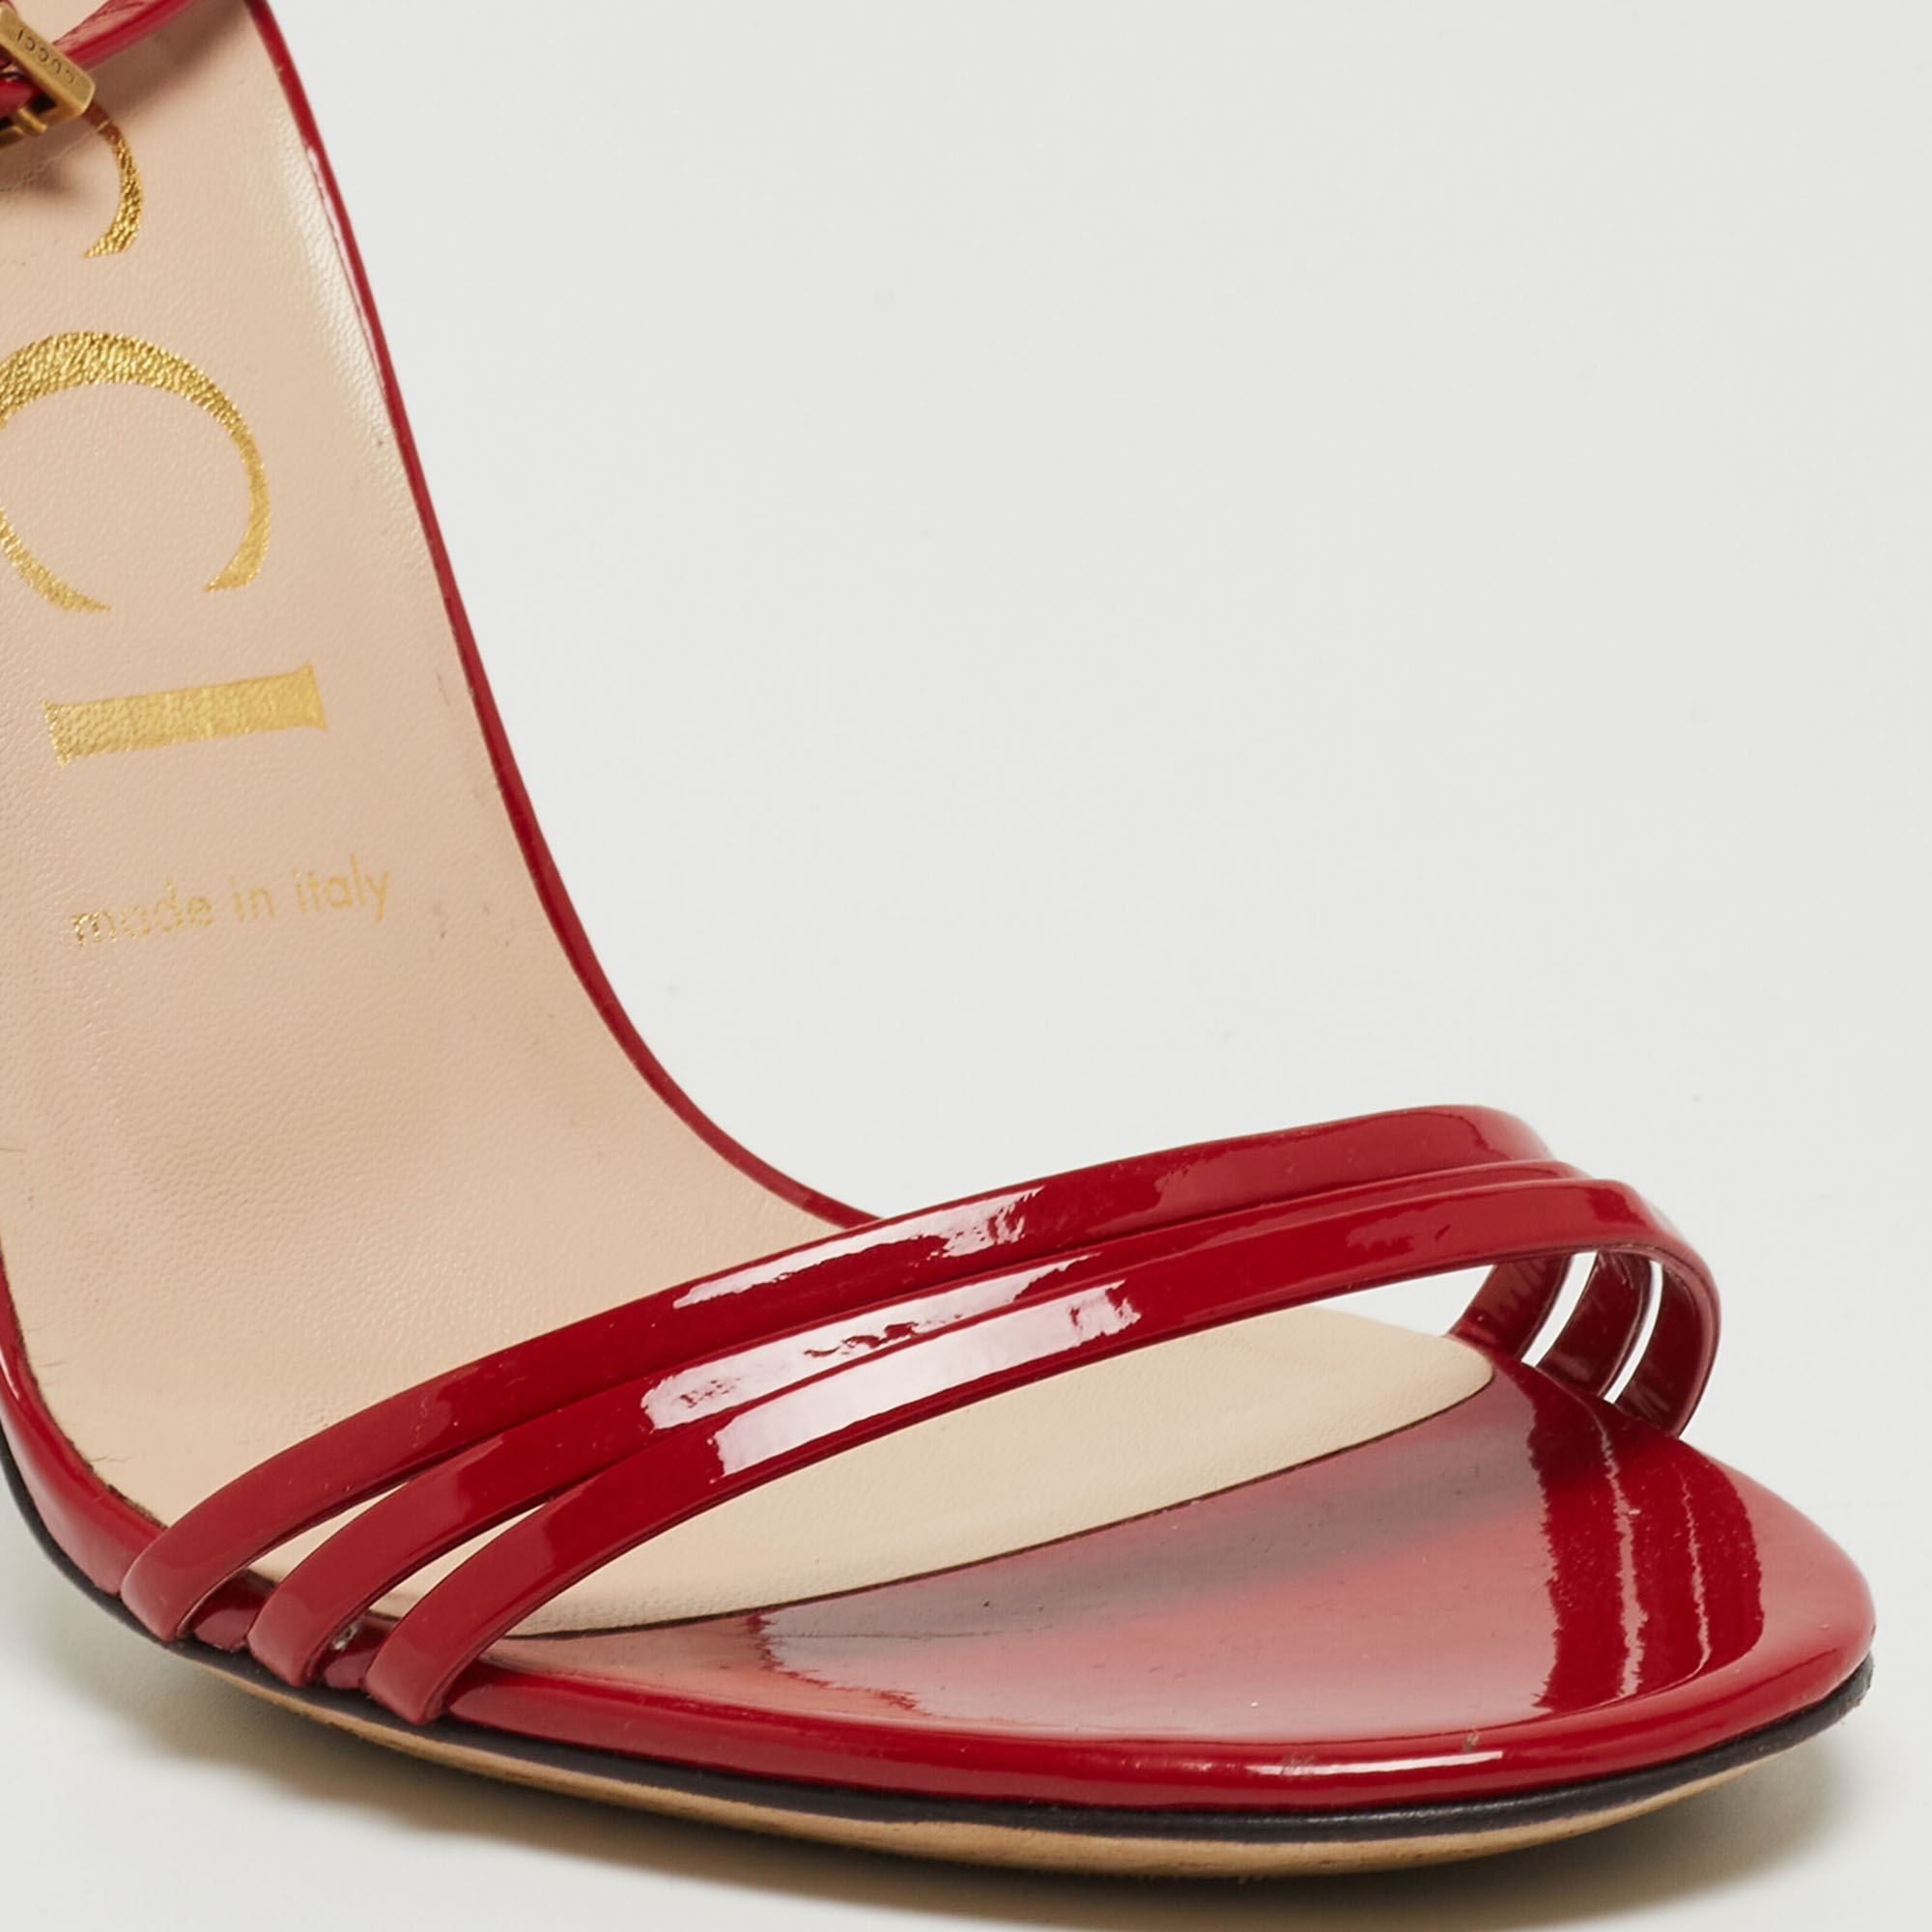 Gucci Red Patent Leather Ilse Ankle Strap Sandals Size 38